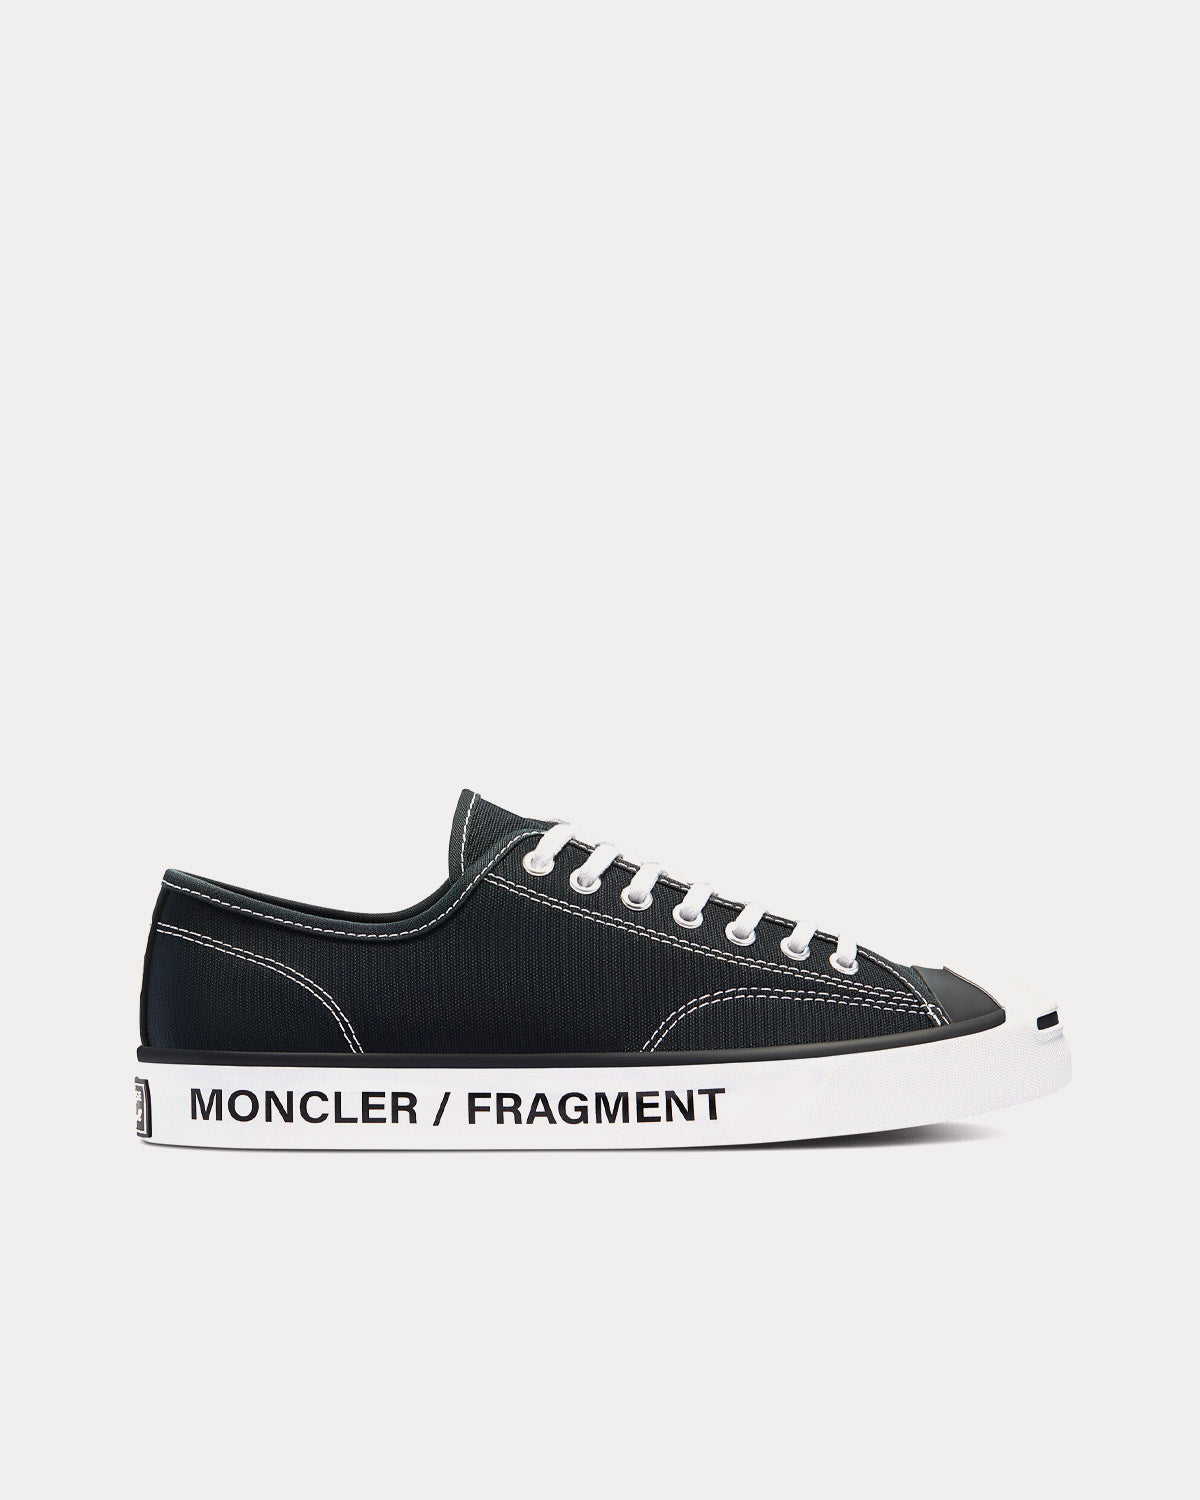 Converse x 7 Moncler FRGMT - Jack Purcell Black / Black / White Low Top Sneakers